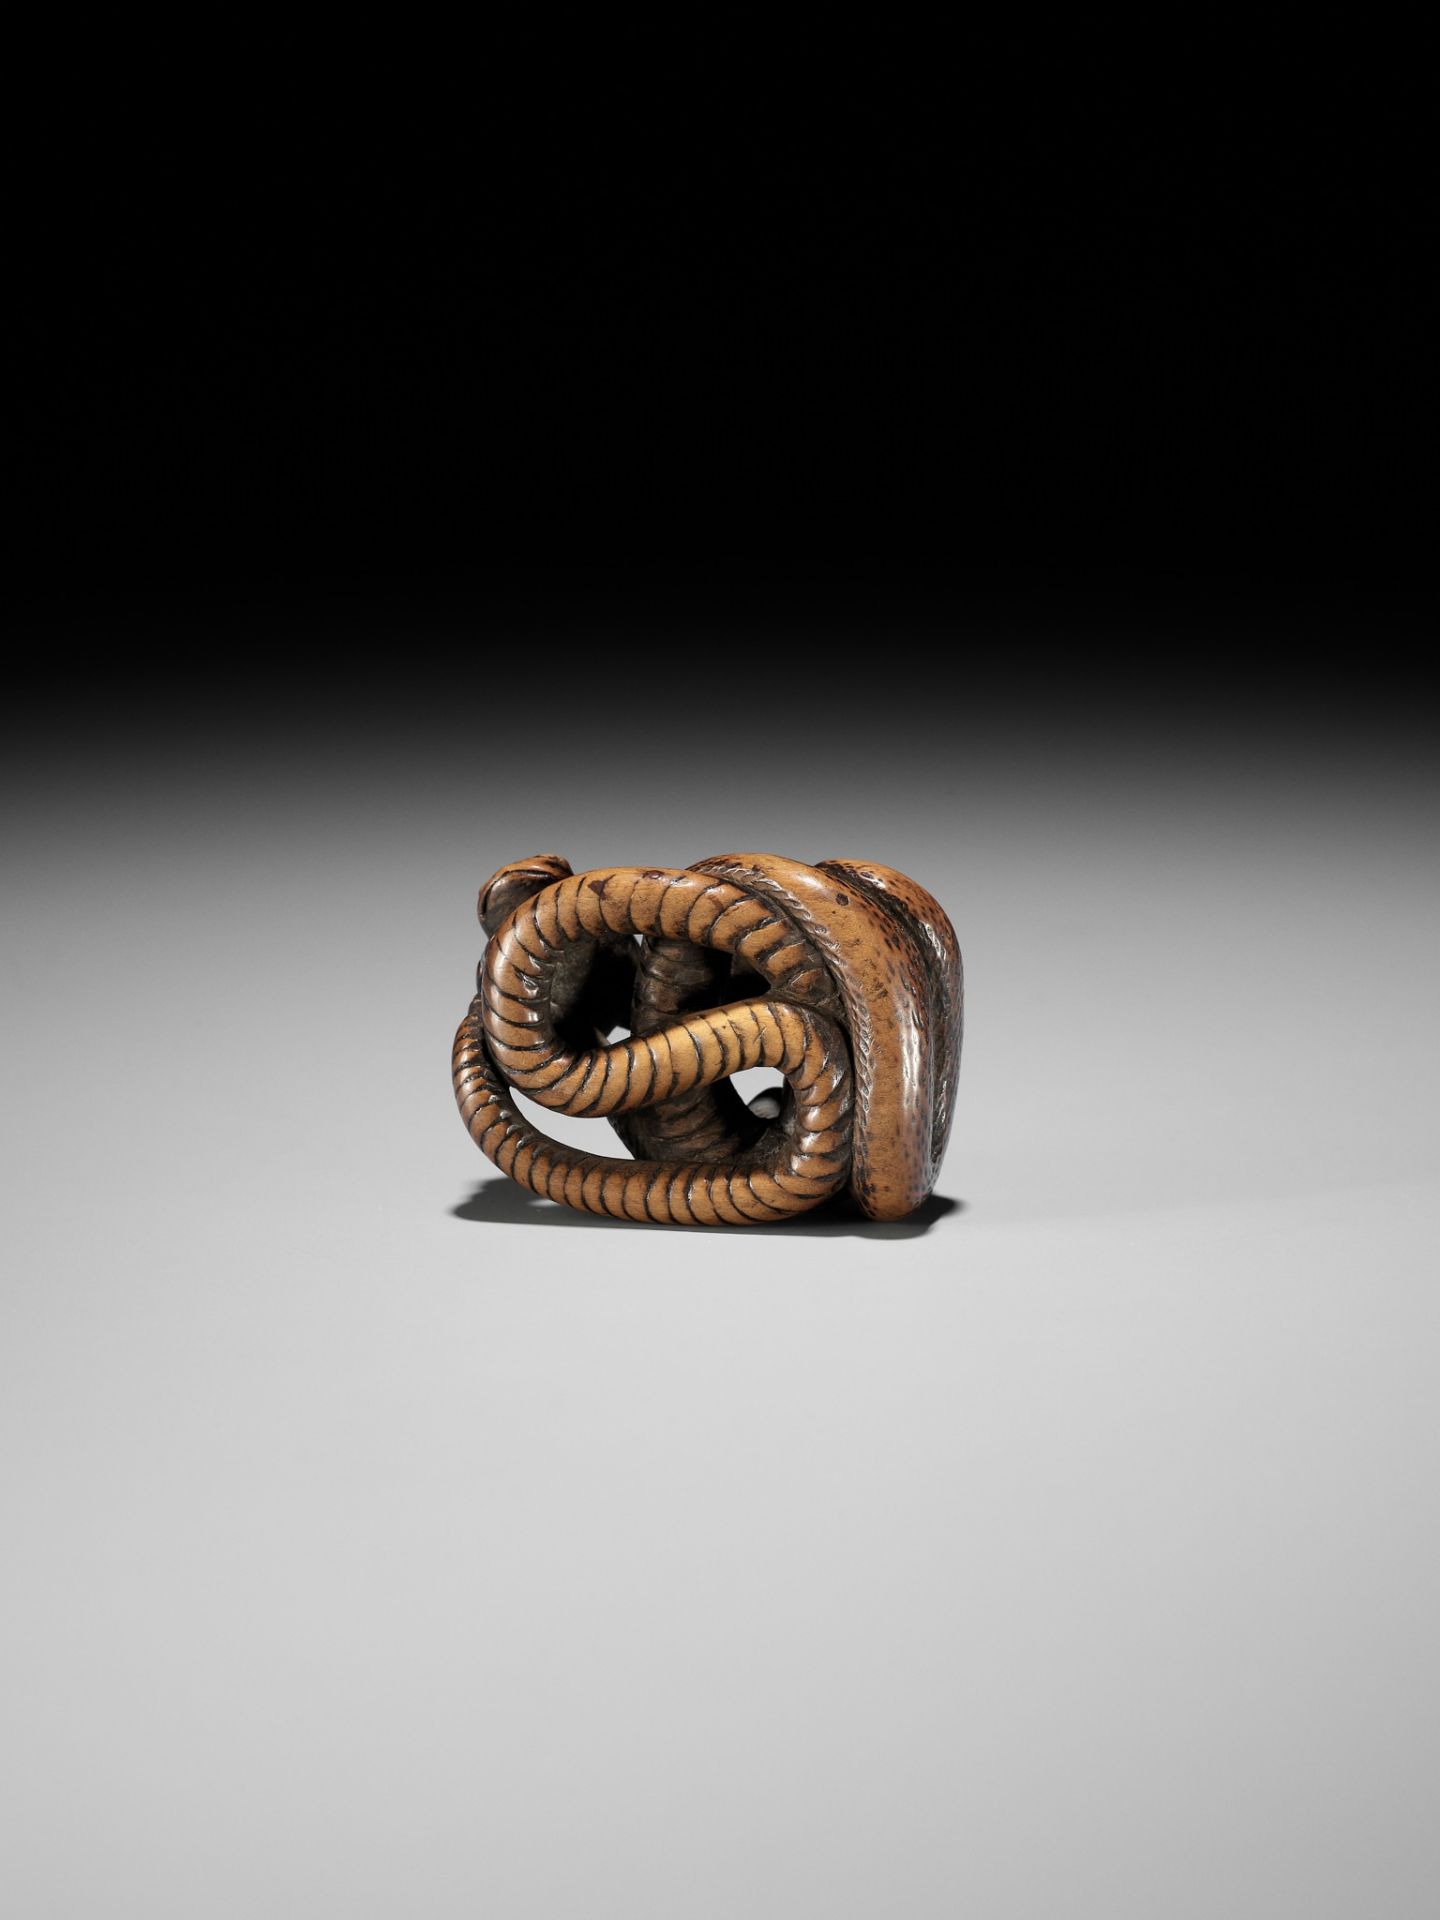 AN EARLY WOOD NETSUKE OF A SNAKE AND FROG - Image 6 of 12